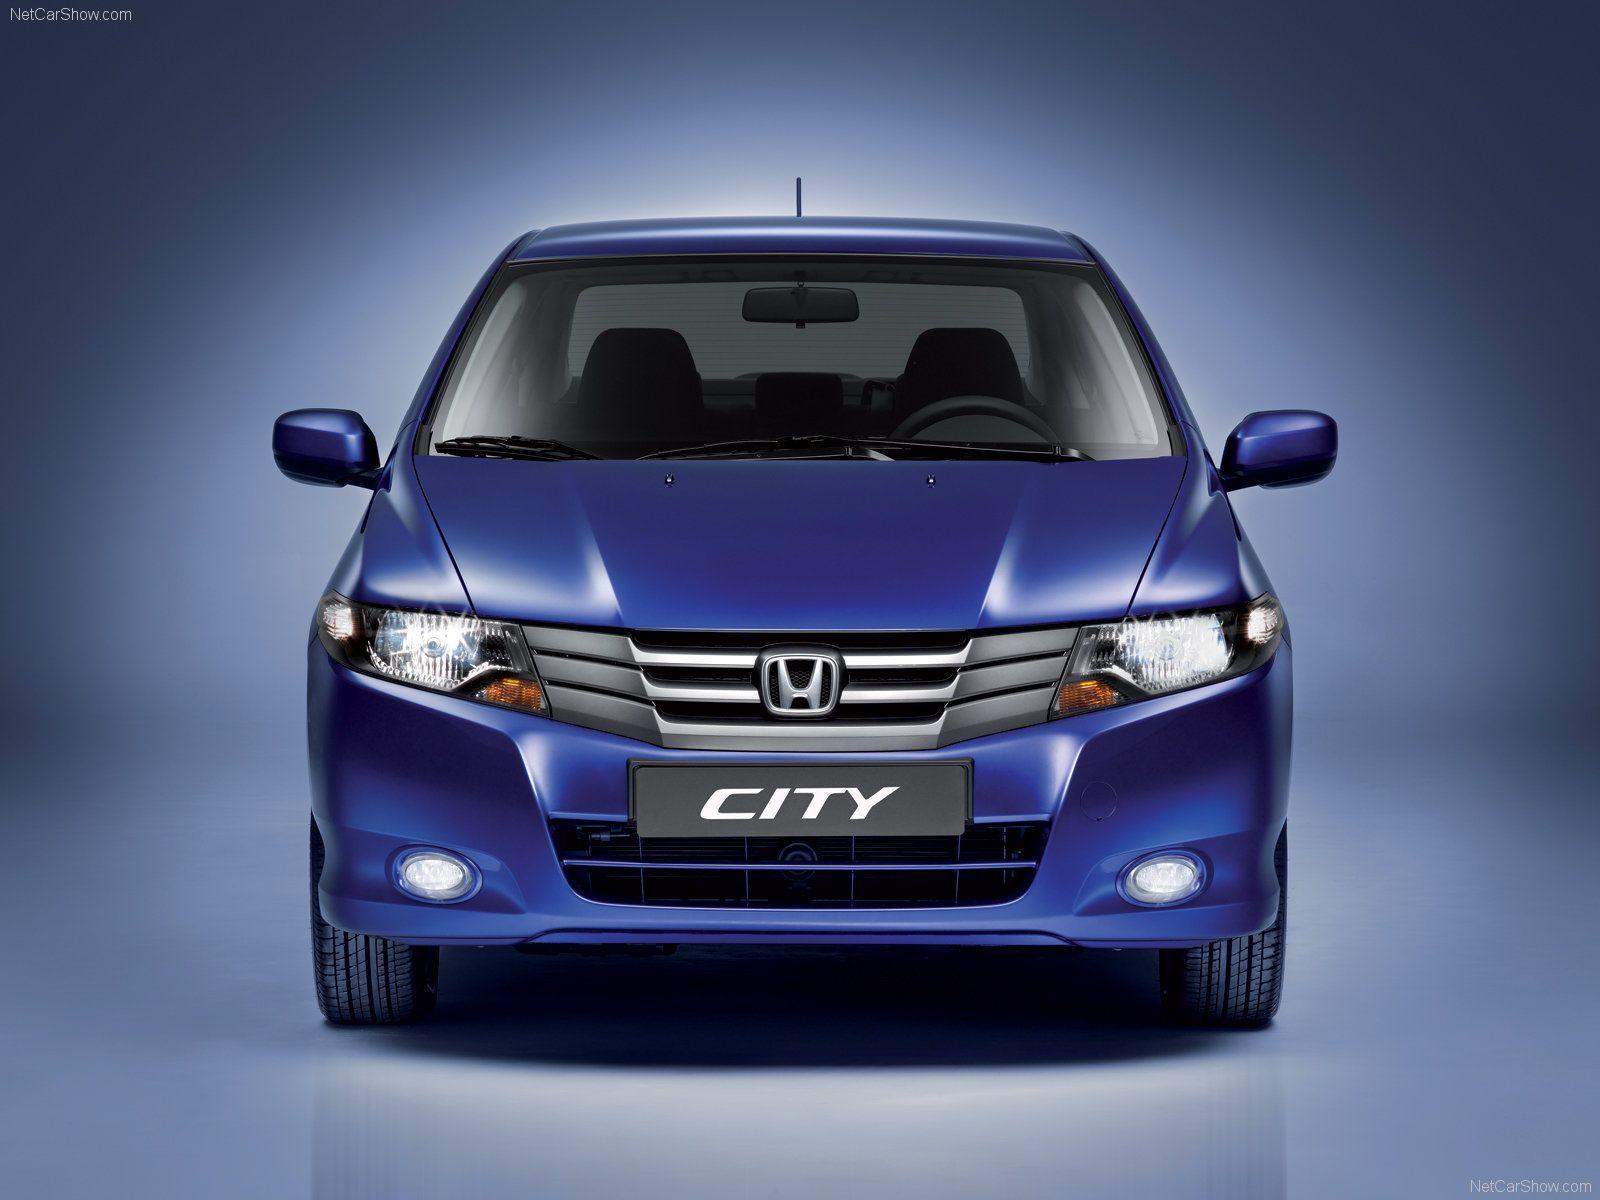 2014 New Honda City Images Wallpapers and Photos